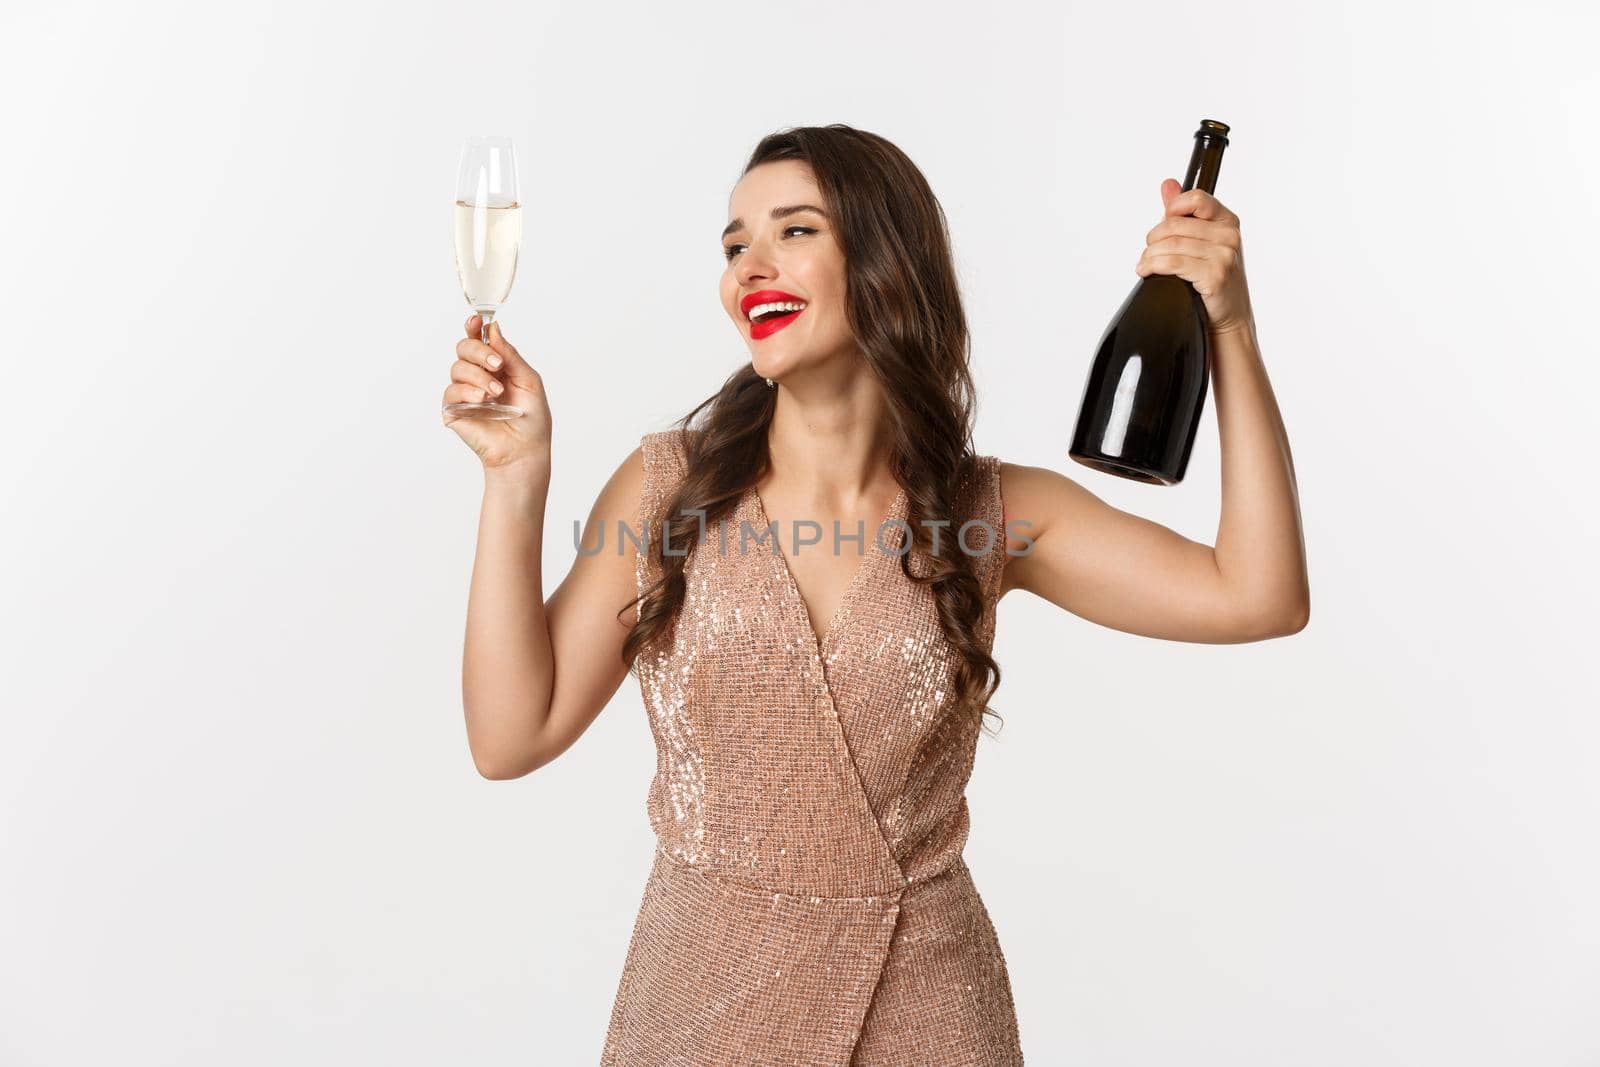 Winter holidays celebration concept. Excited beautiful woman in dress raising glass of champagne for toast, enjoying Christmas party, standig over white background.